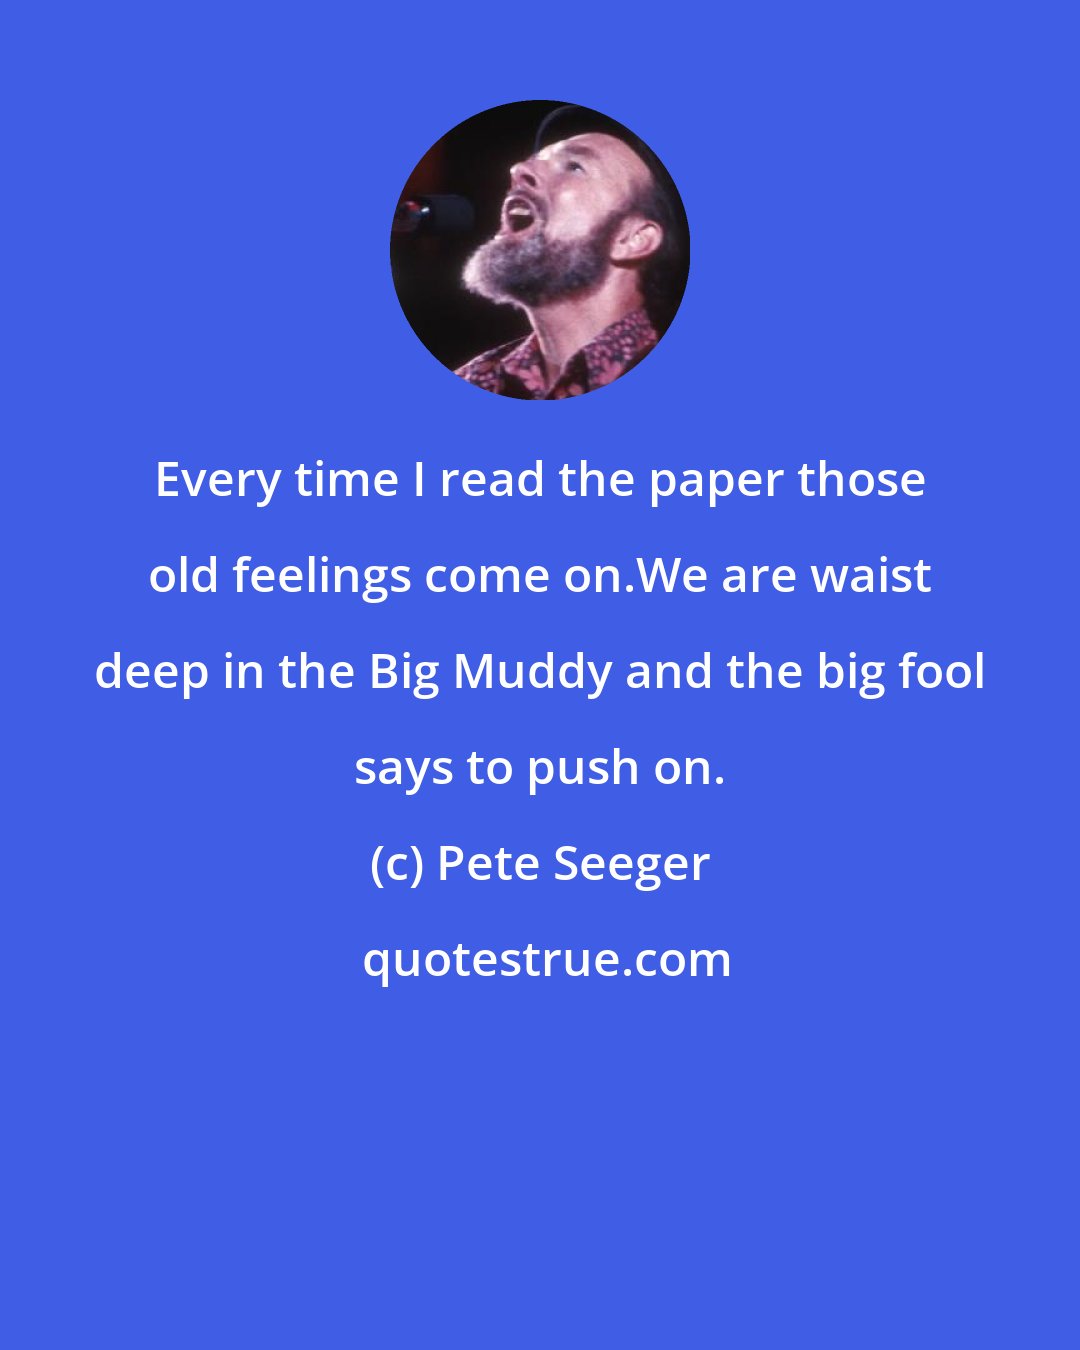 Pete Seeger: Every time I read the paper those old feelings come on.We are waist deep in the Big Muddy and the big fool says to push on.